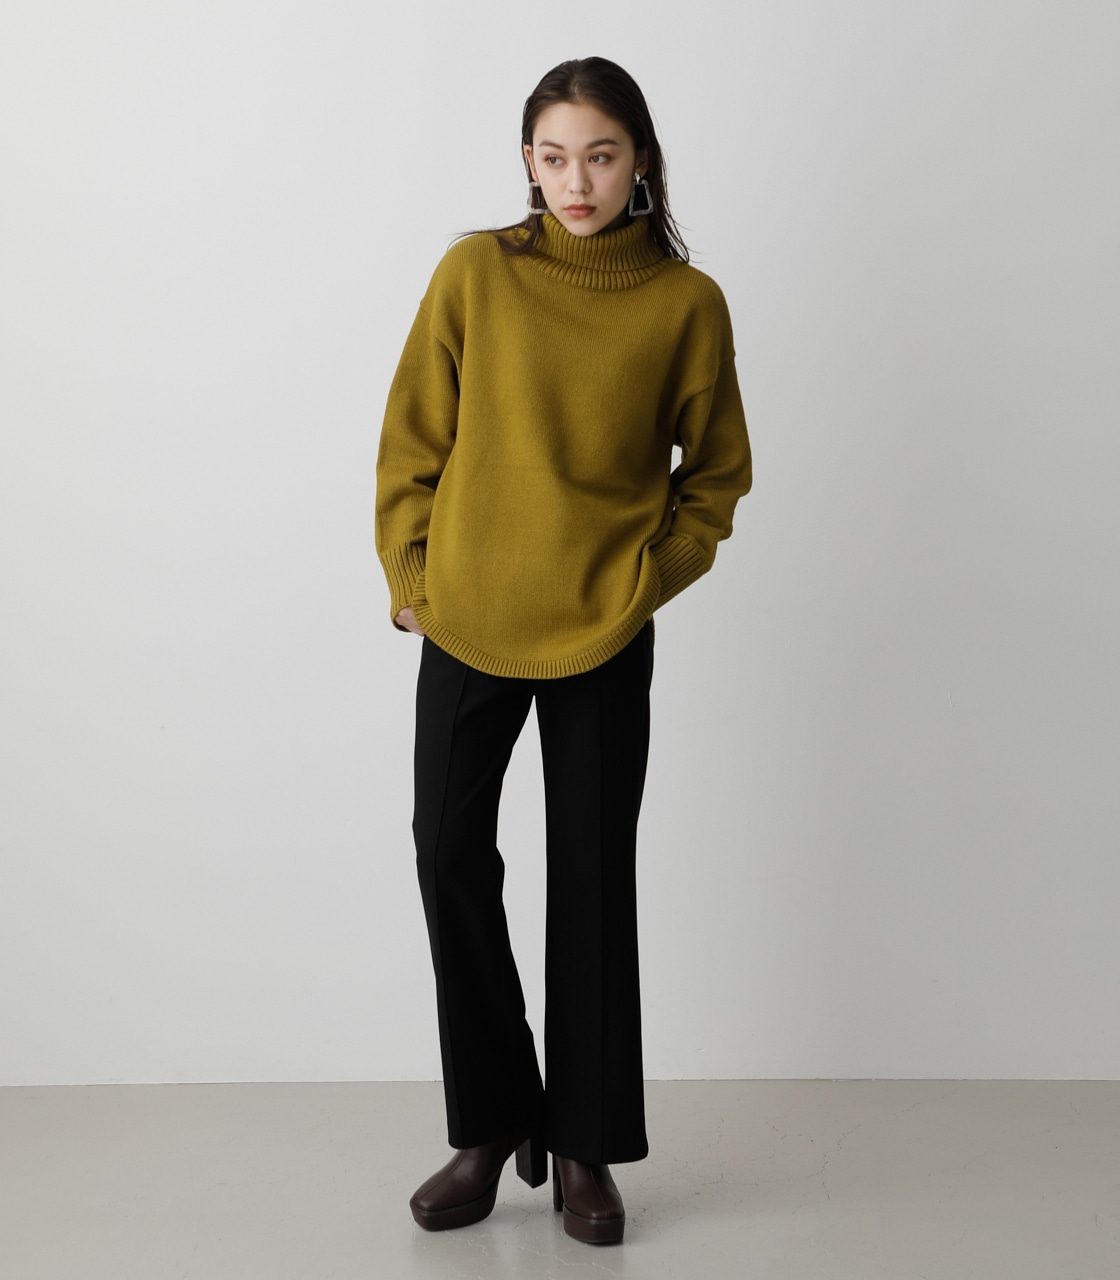 BIG TURTLE KNIT TOPS/ビッグタートルニットトップス 詳細画像 LIME 4